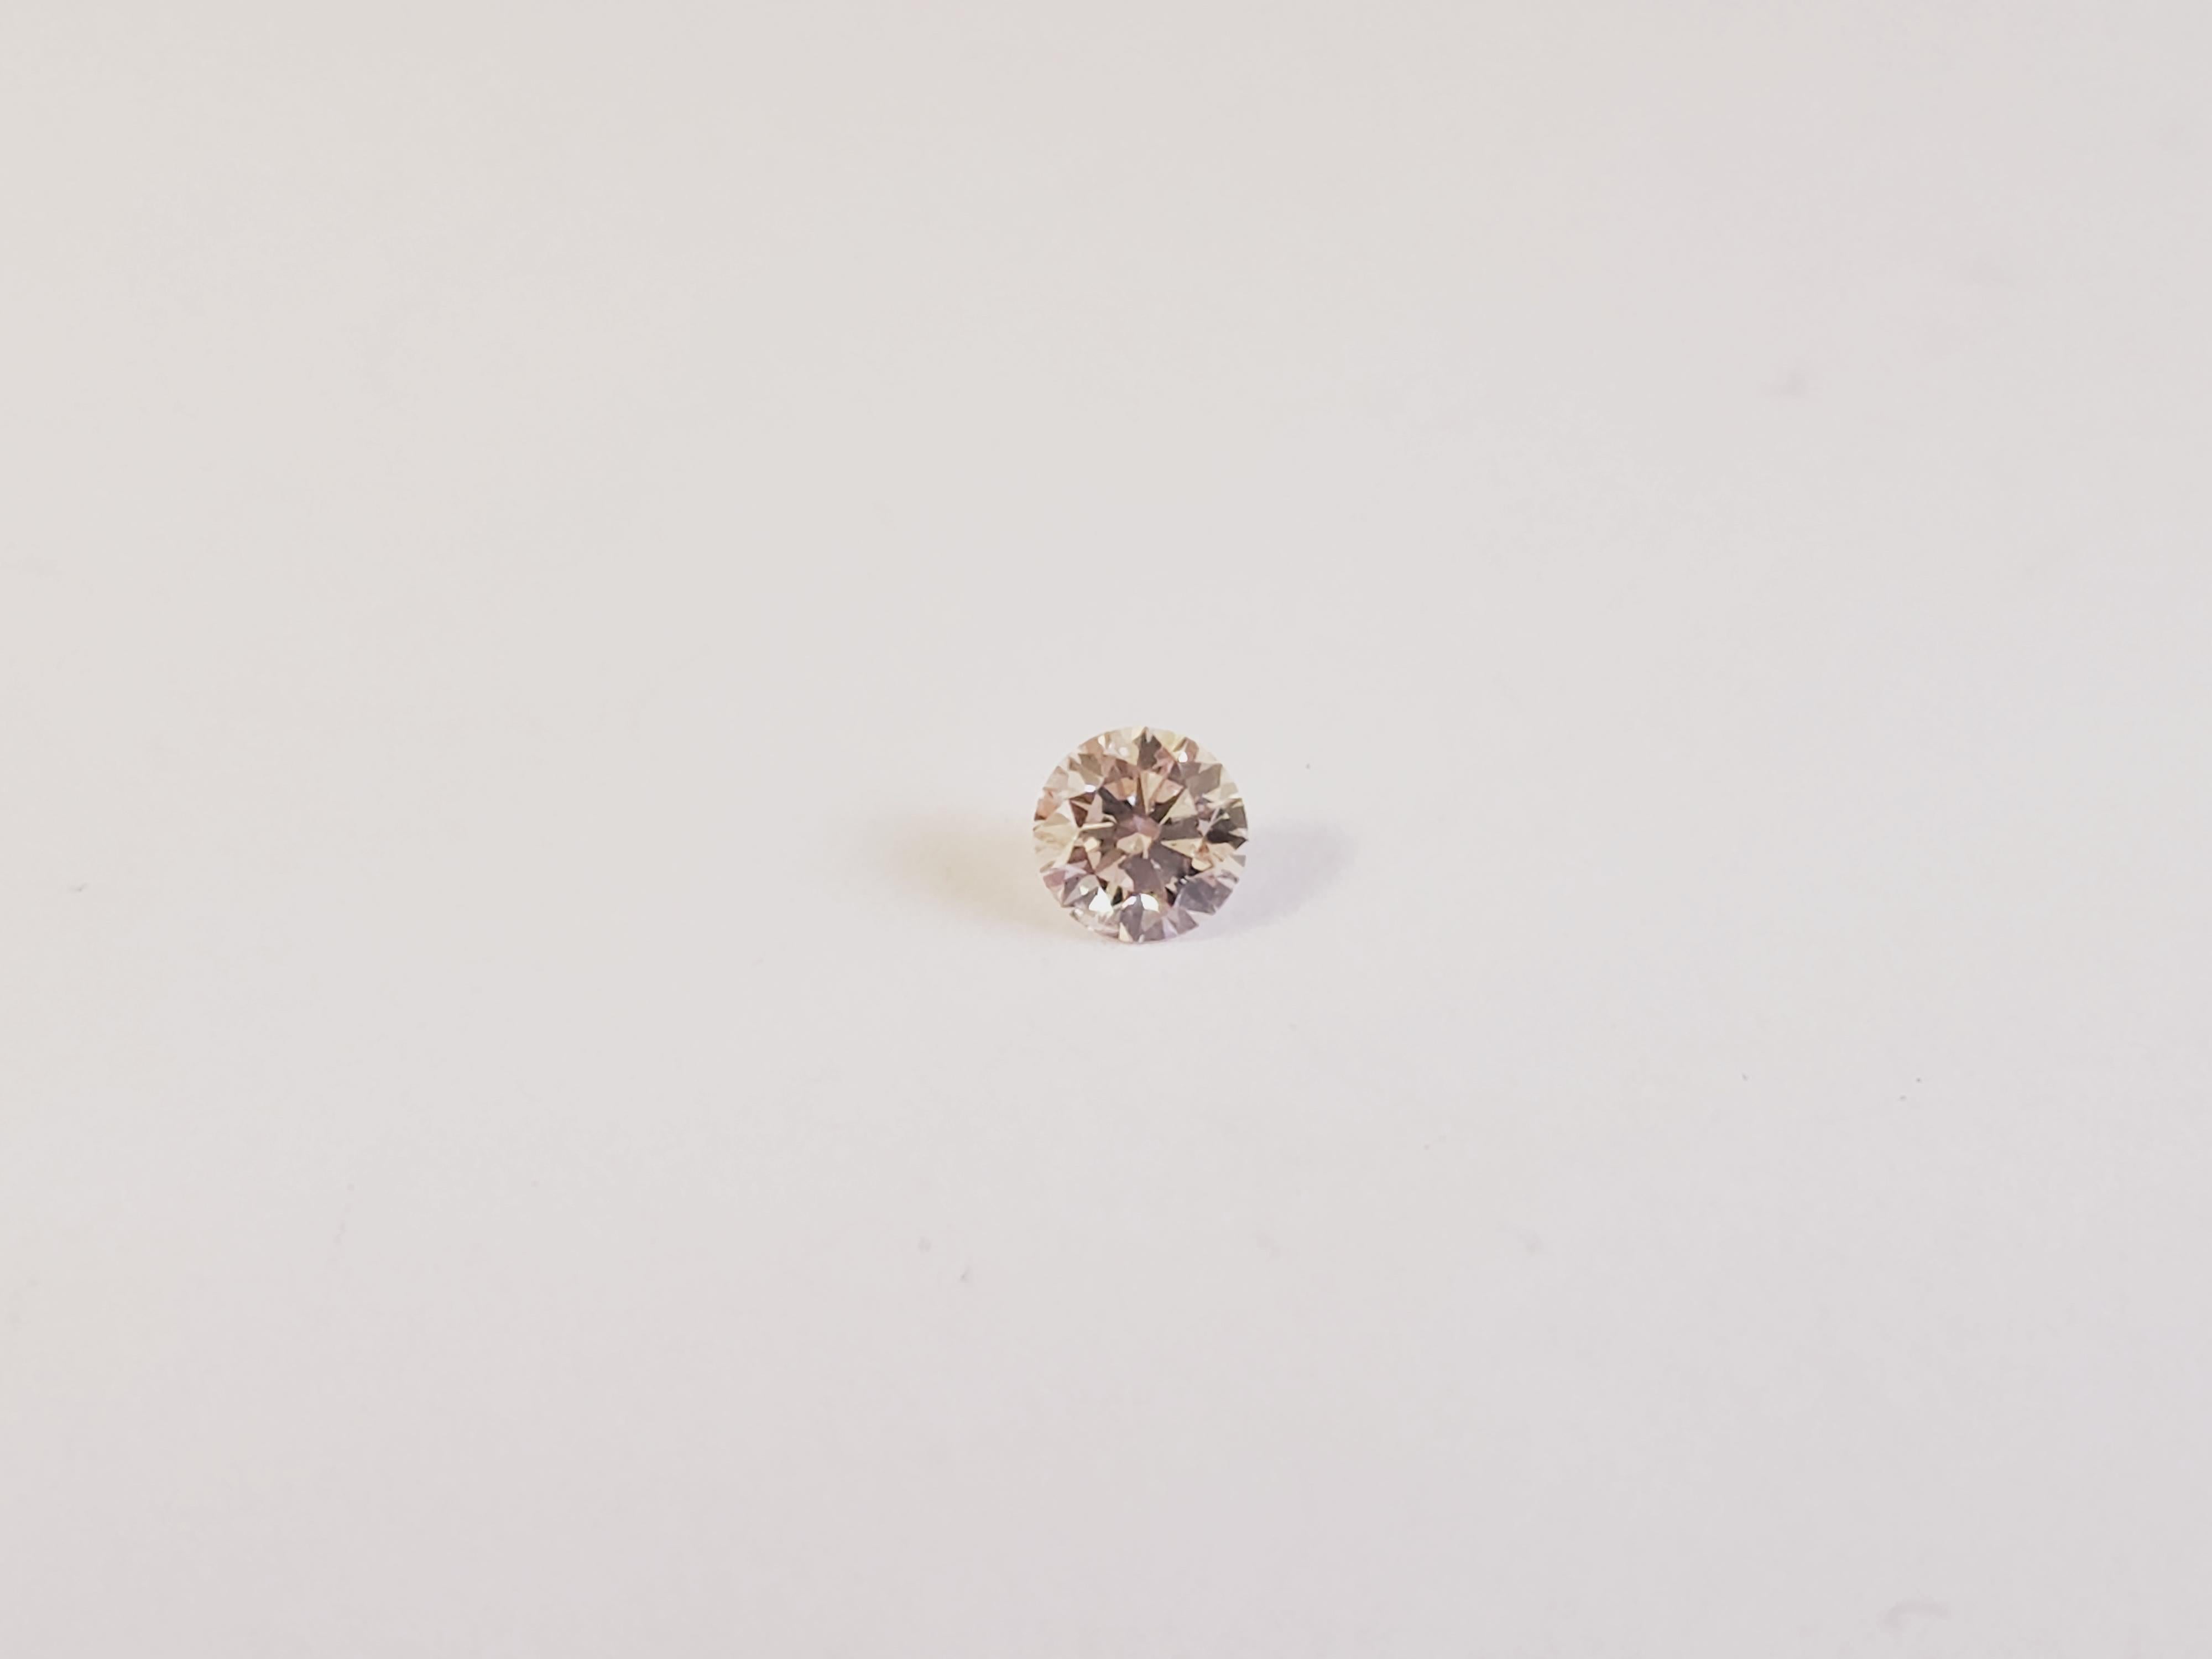 Argyle 0.12 Carat Natural Pink Champagne Round Shape Loose Diamond. Argyle with inscription on the diamond.

2020: Closure of the Argyle mine On 3 November 2020, mining at Argyle officially stopped after 37 years of operations.
It's a great